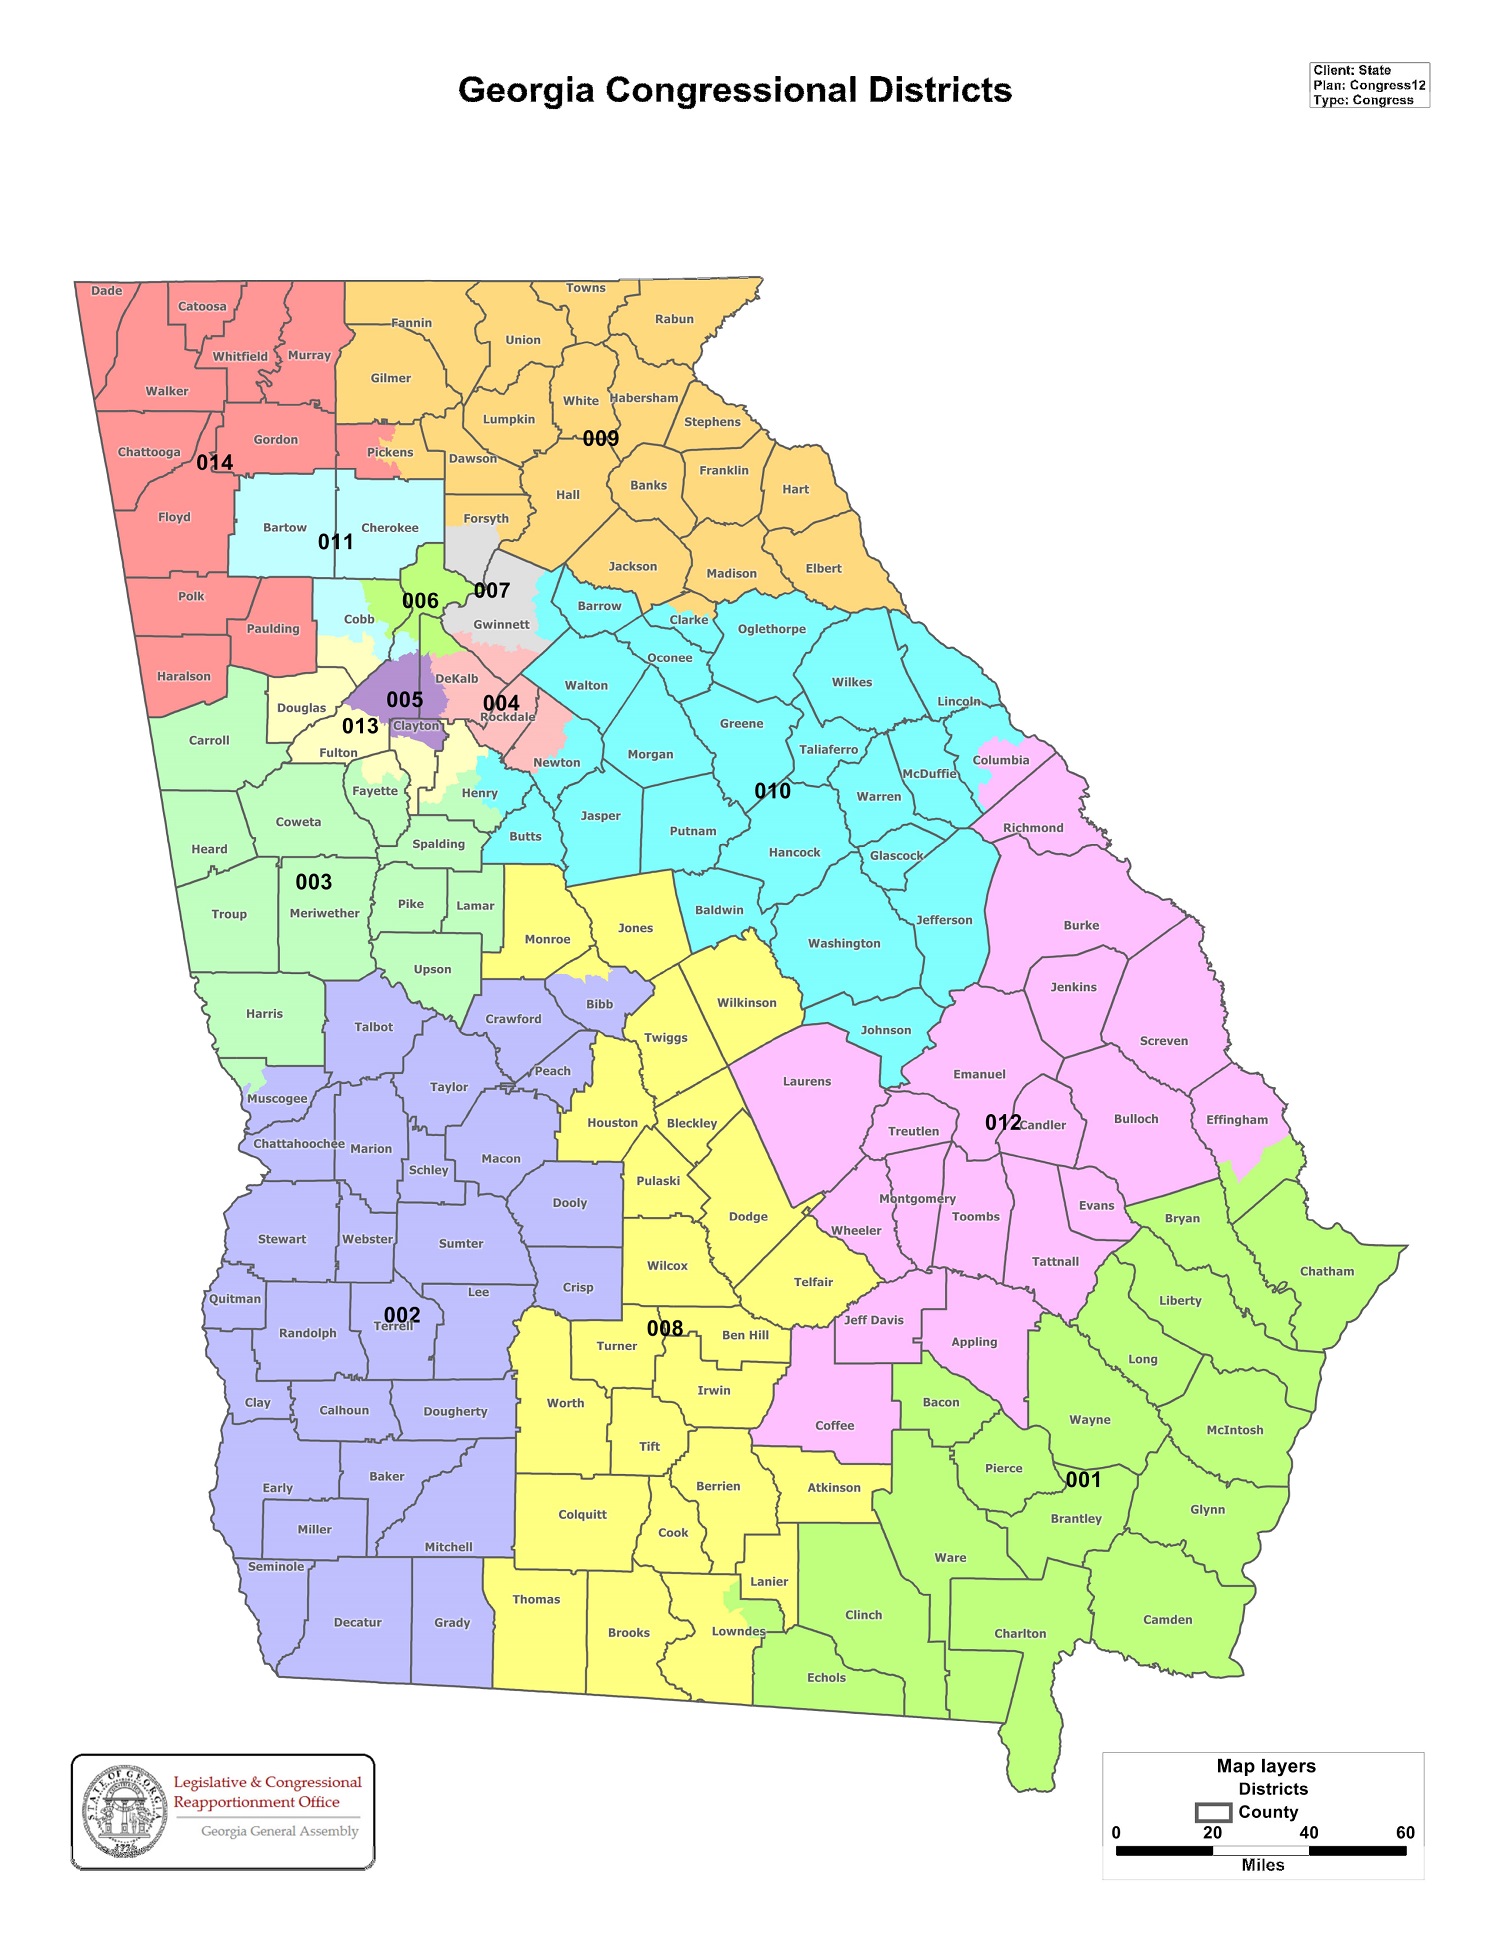 State redistricting information for Georgia